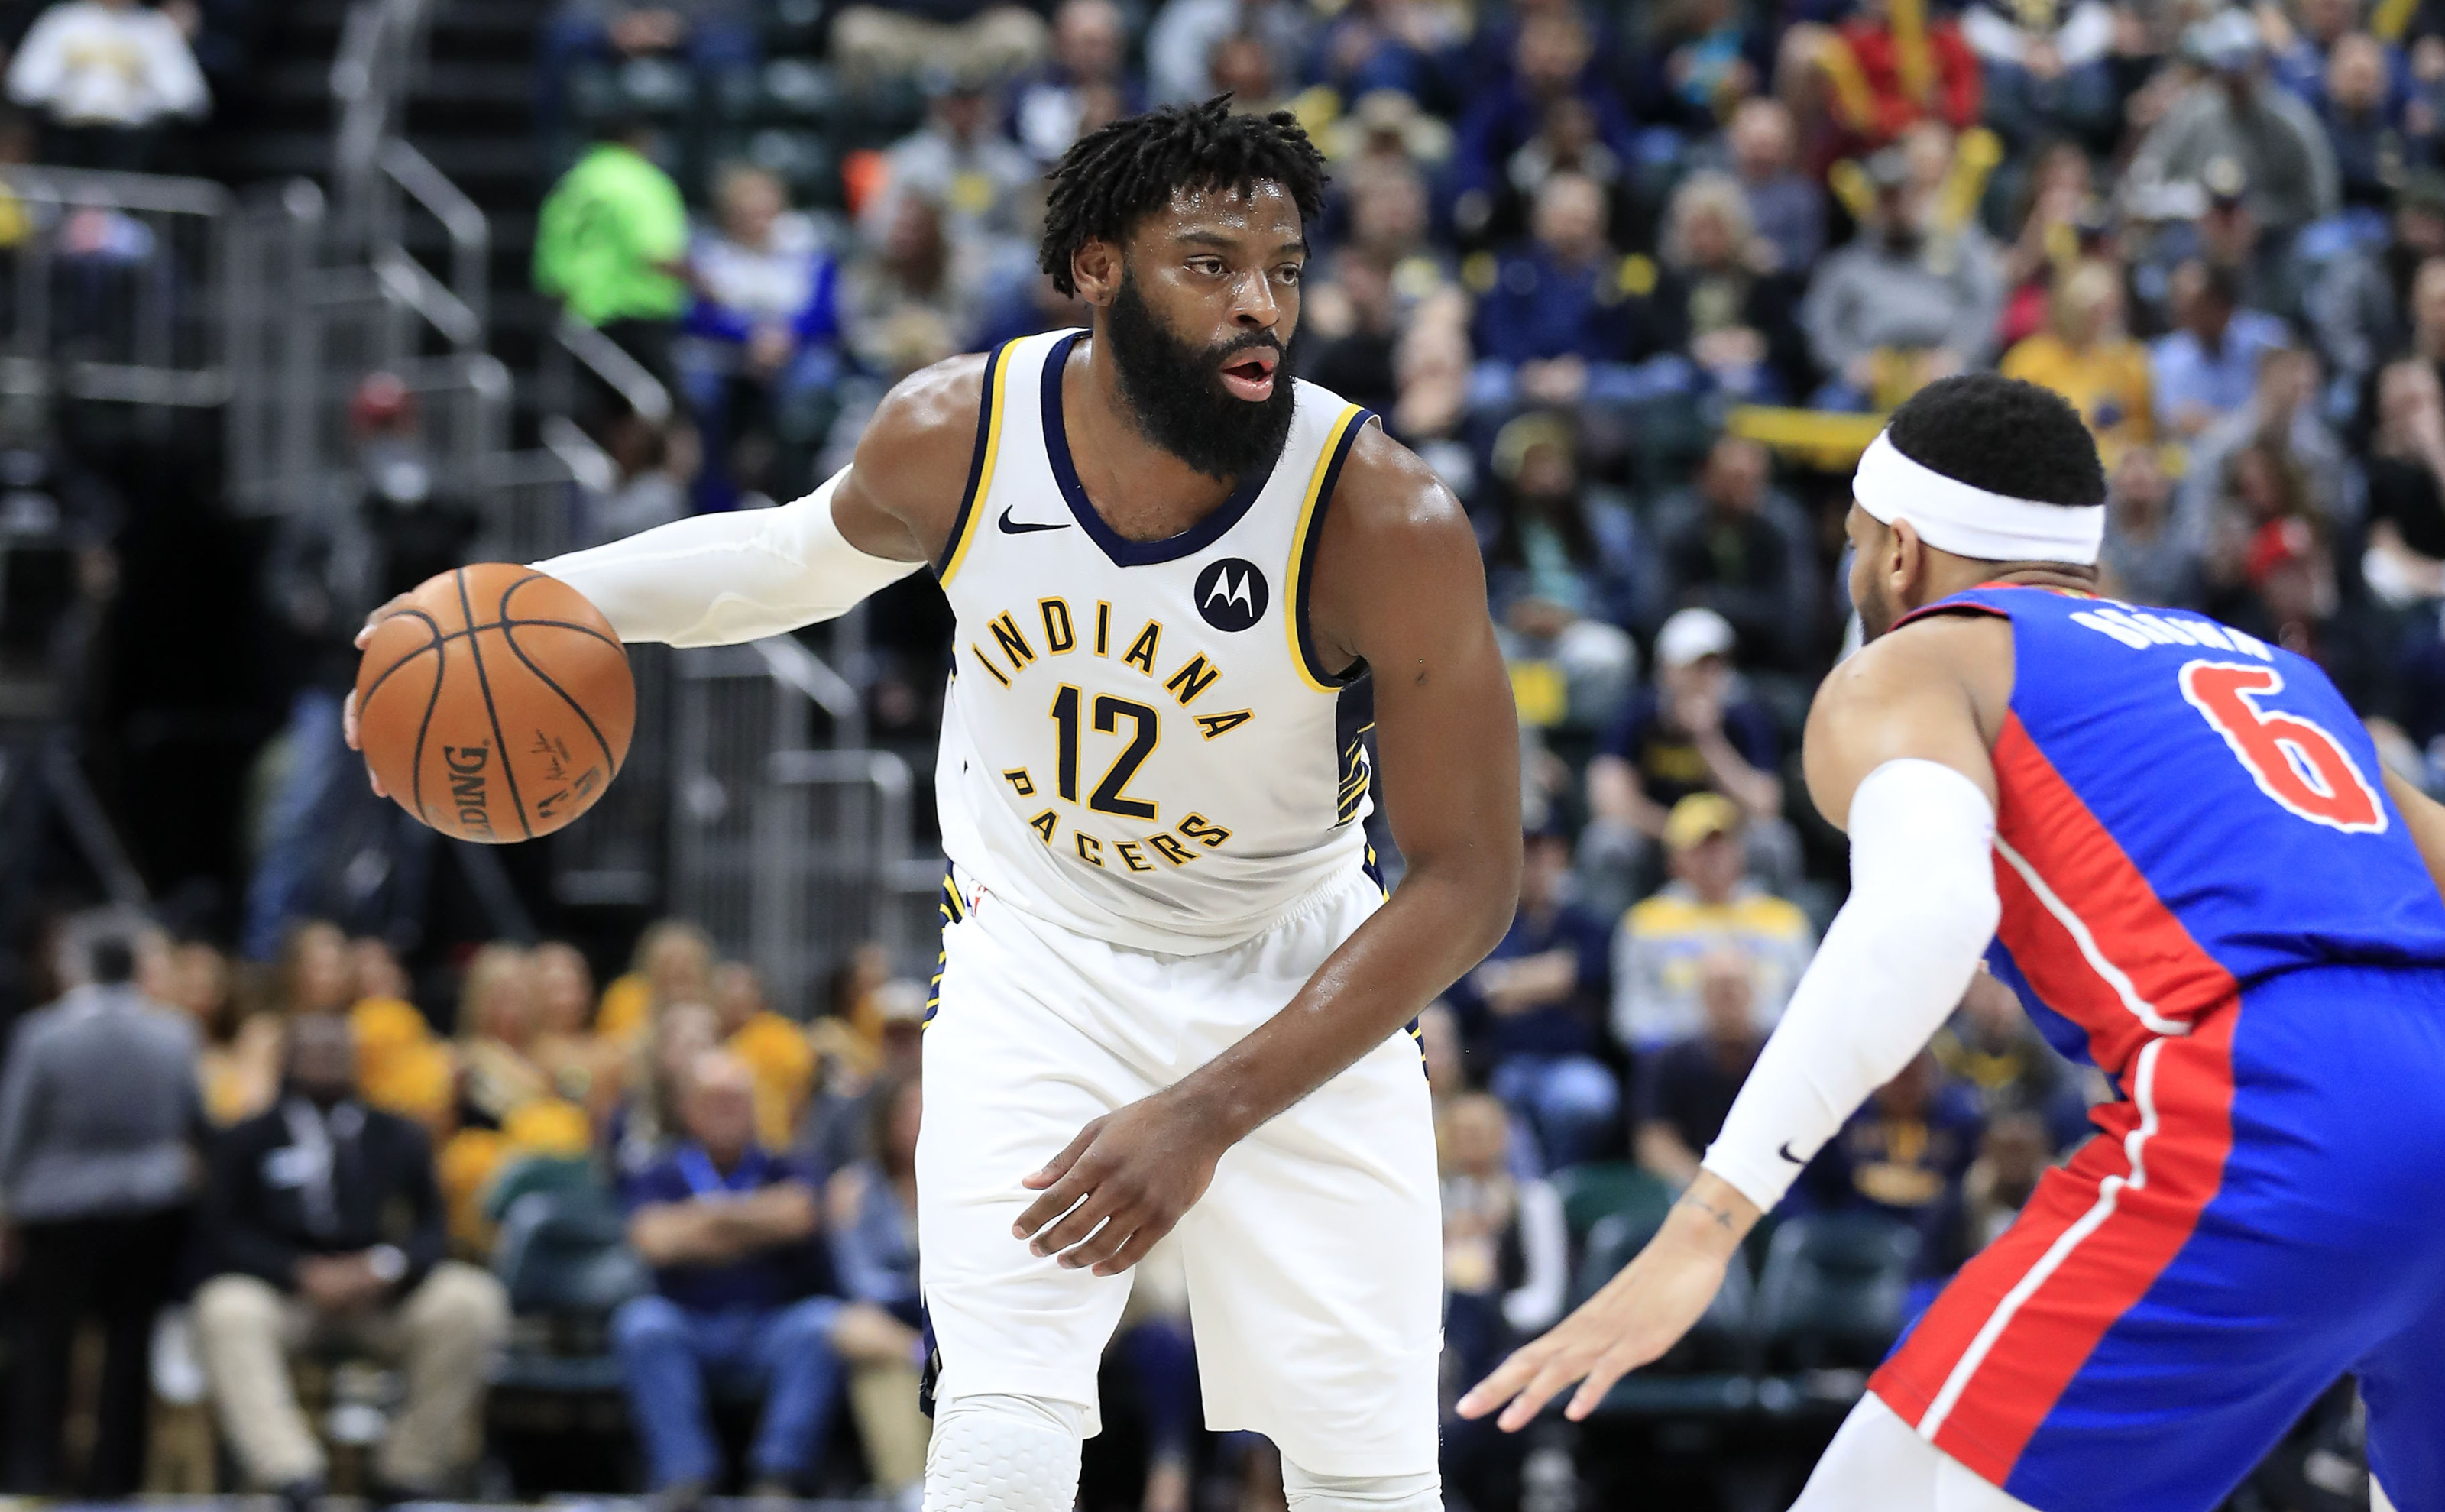 The Indiana Pacers signed Tyreke Evans to an Amazing Contract